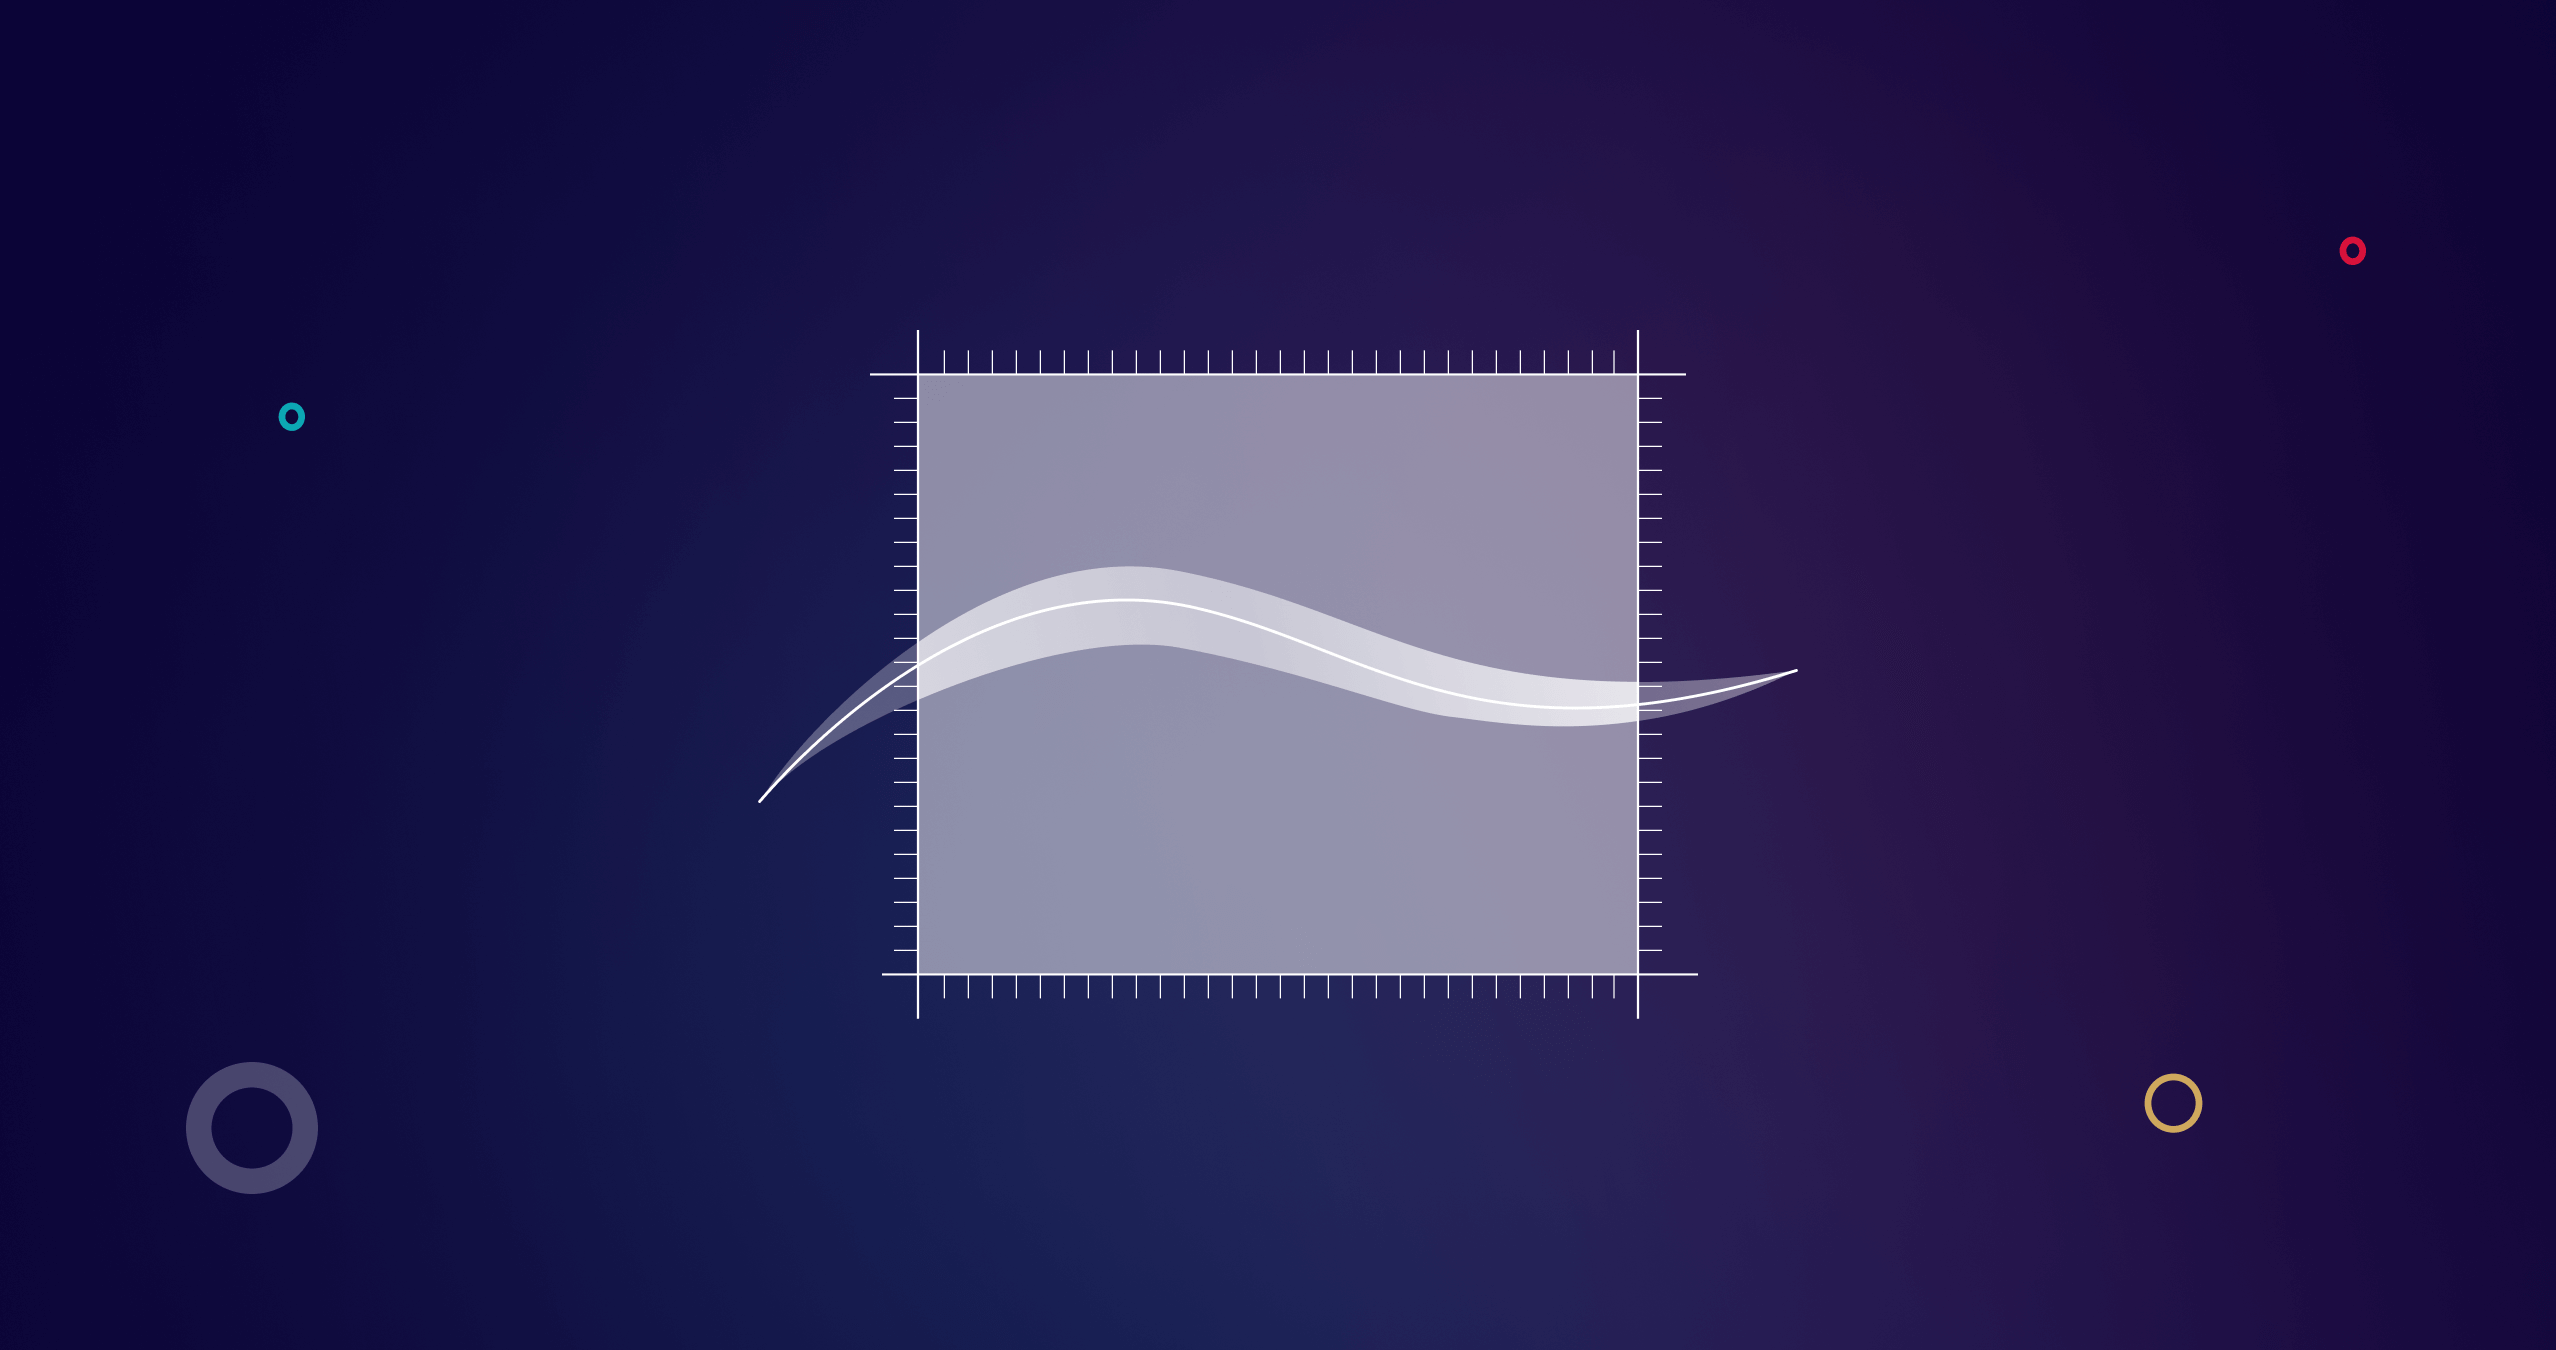 Graphic design interface with a wave line vector on a grid background